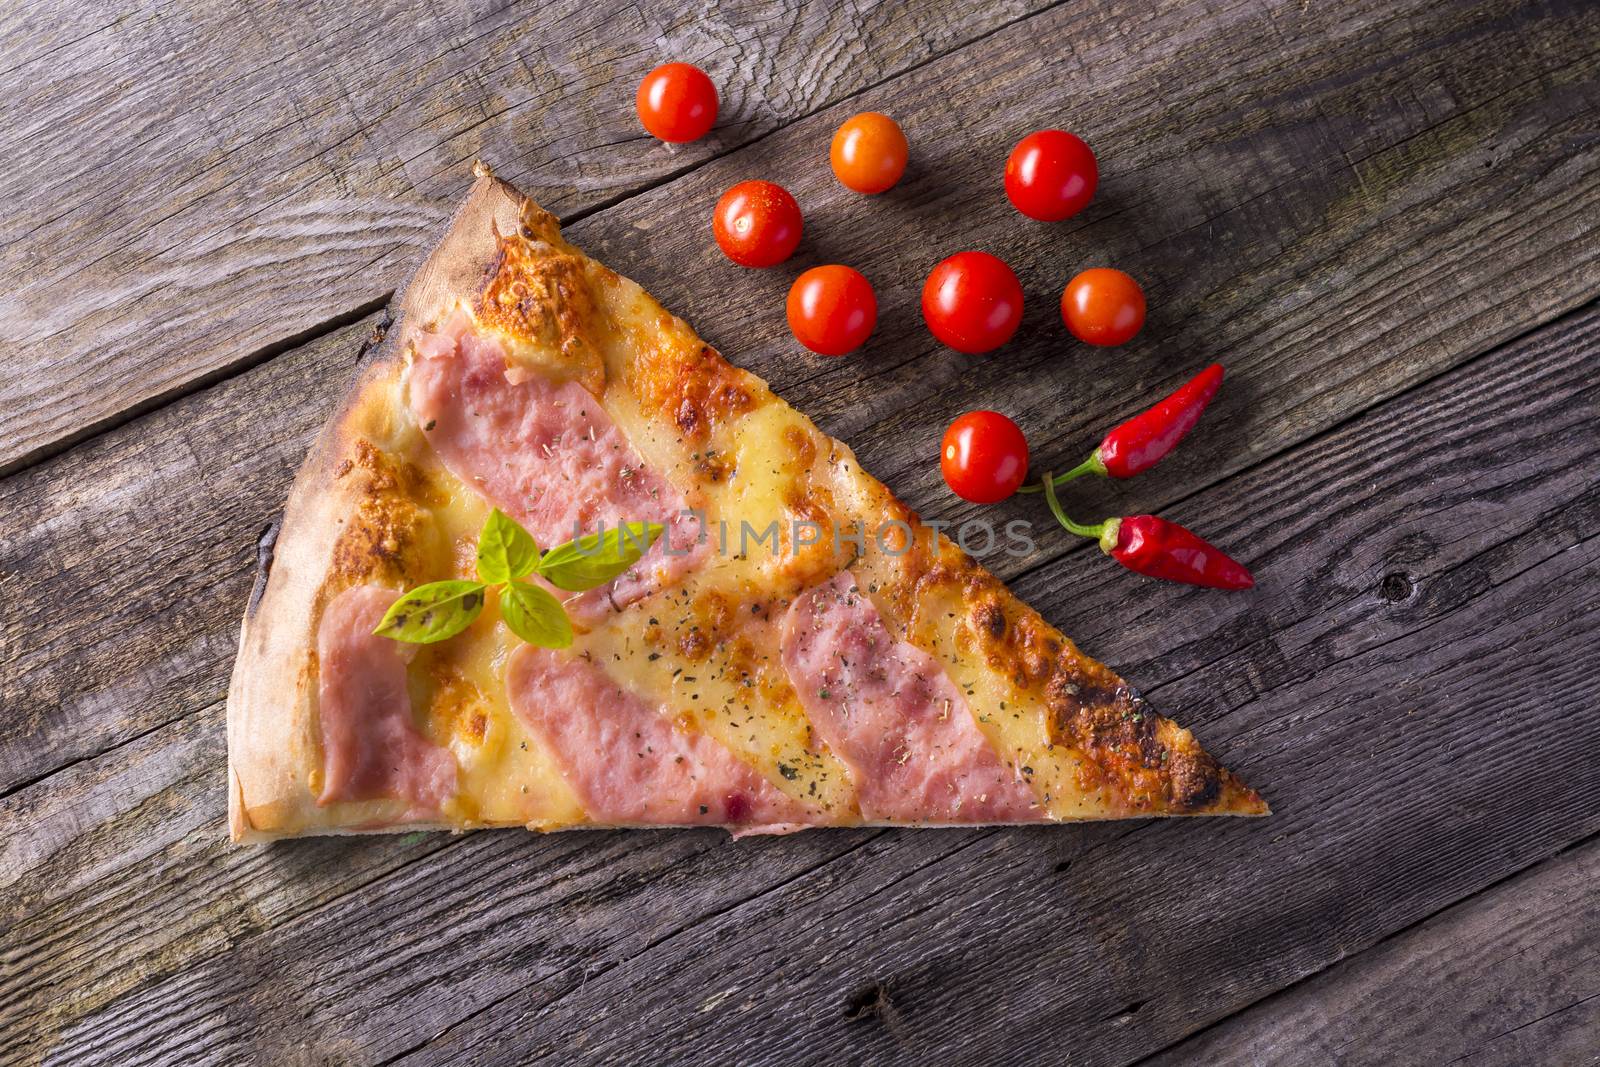 Pizza on wooden table, cherry tomato and hot peppers by adamr